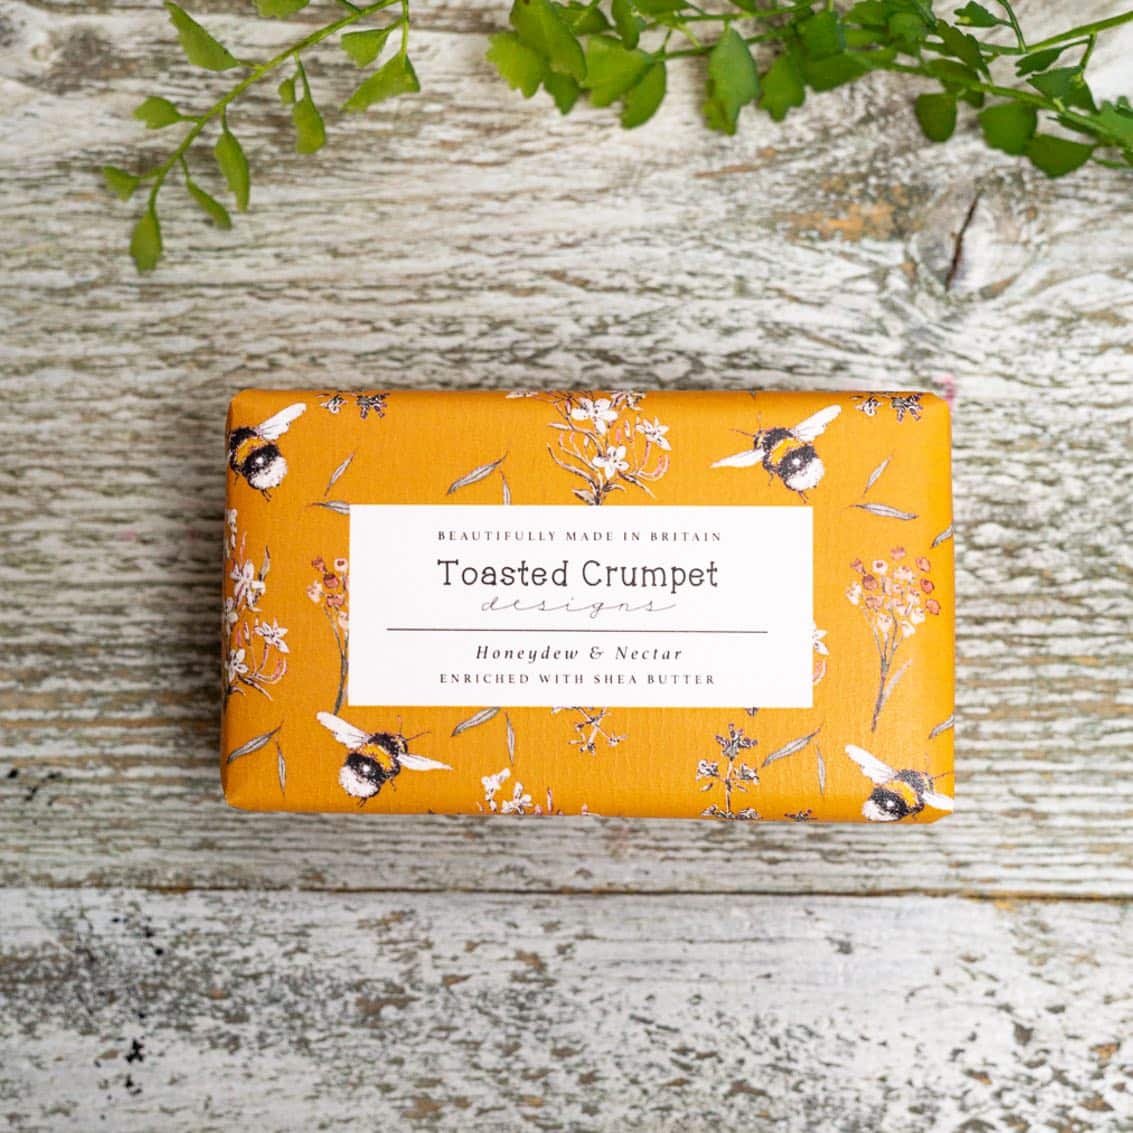 Rectangular soap wrapped in orange packaging with pictures of bees. Photographed birds-eye view on a wooden surface.